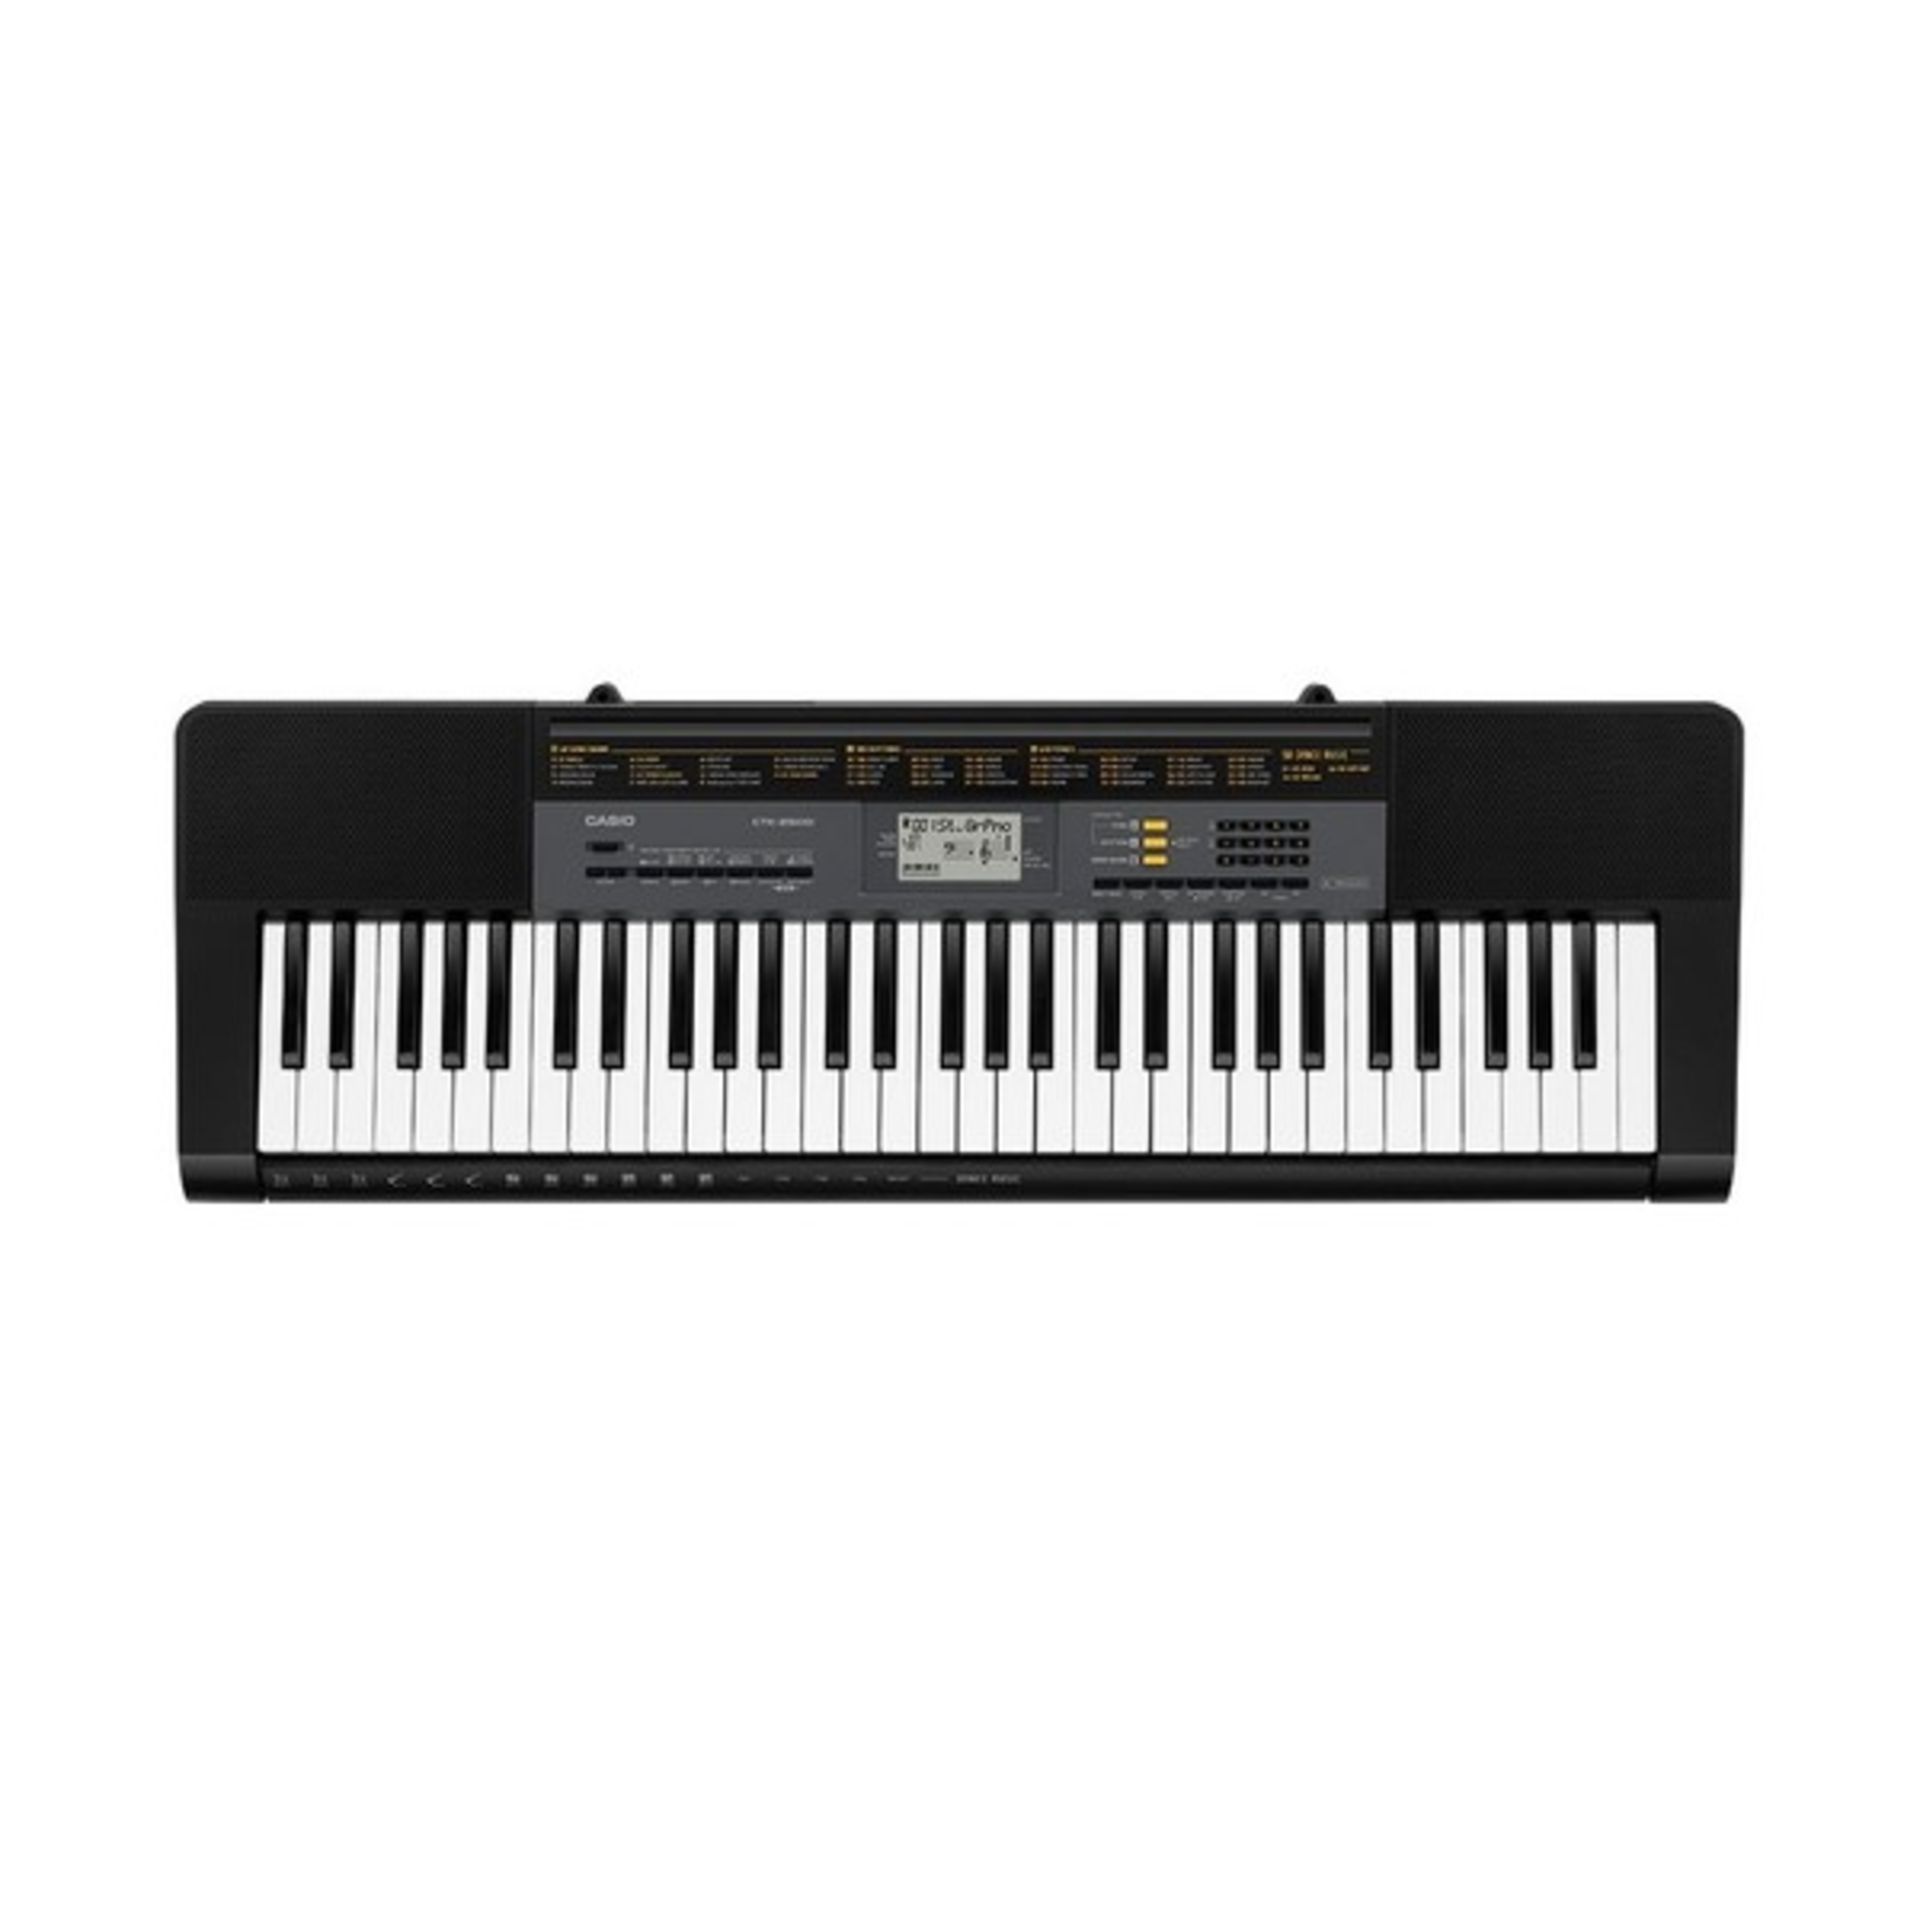 1 BOXED CASIO CTK-2500 DIGITAL KEYBOARD WITH STAND RRP Â£149.99 (GENERIC IMAGE GUIDE)